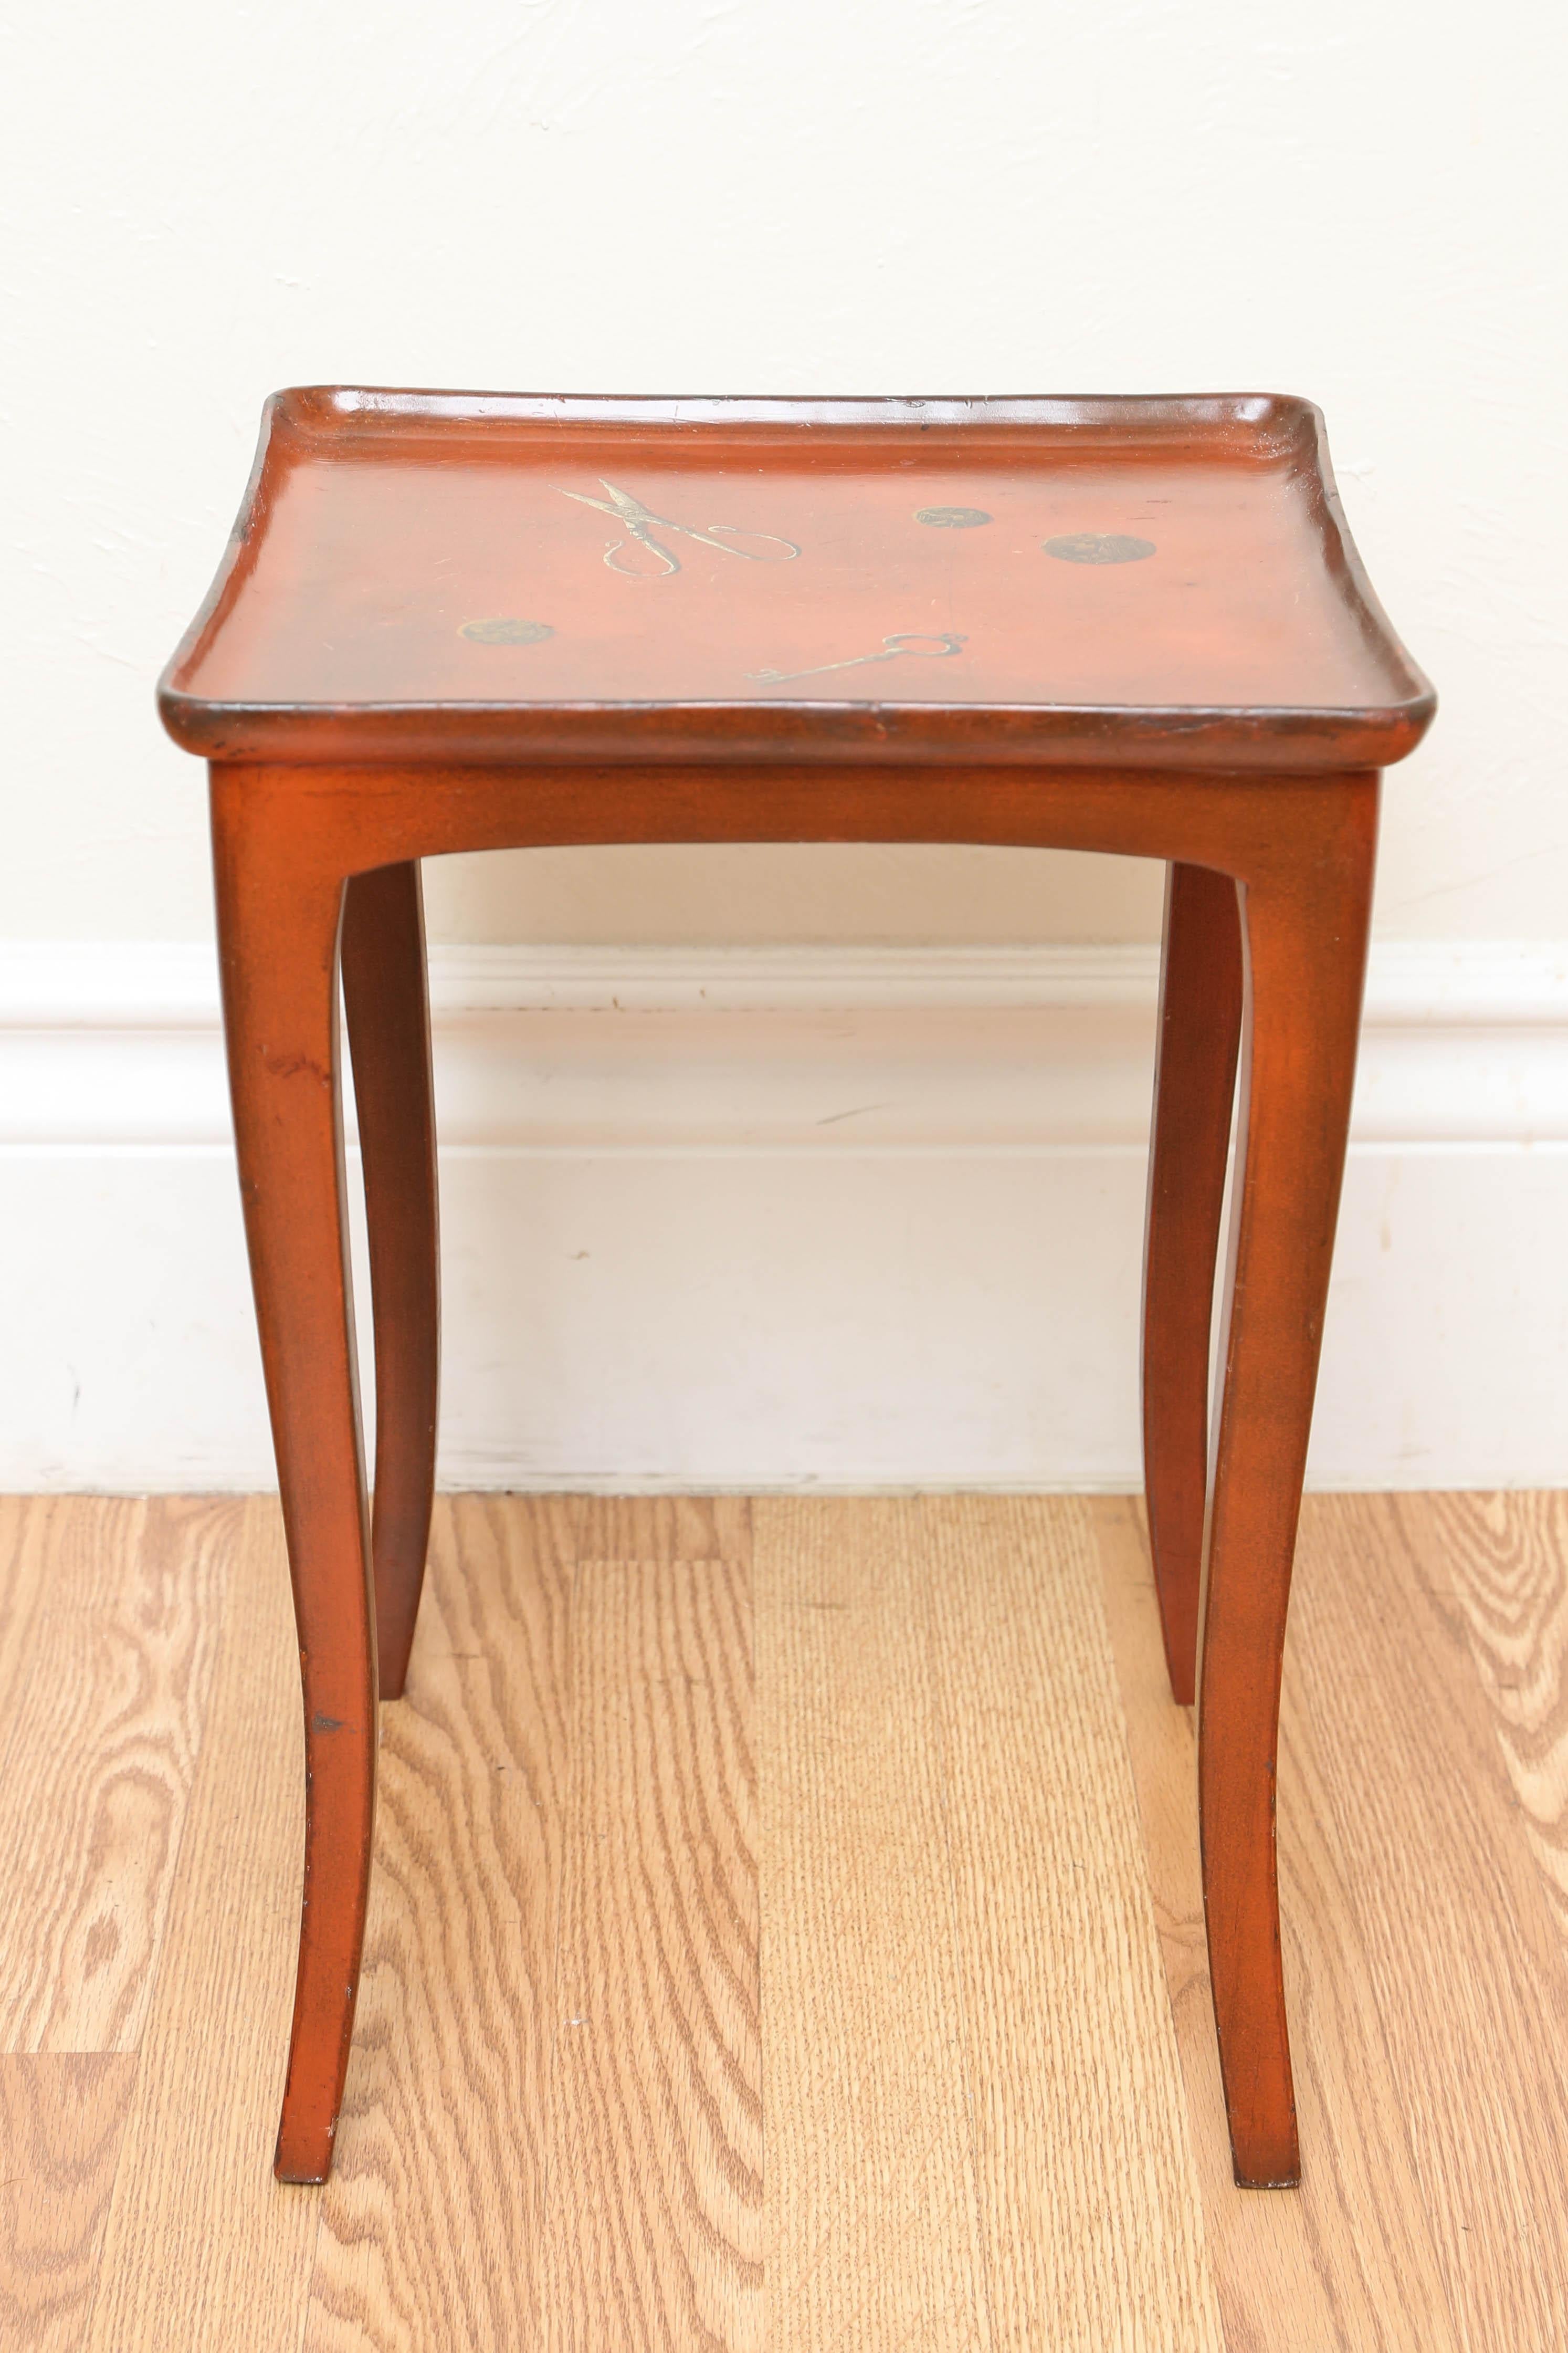 Chinese red lacquered side table with Trompe L' Oeil top featuring a scissor, key & coins.